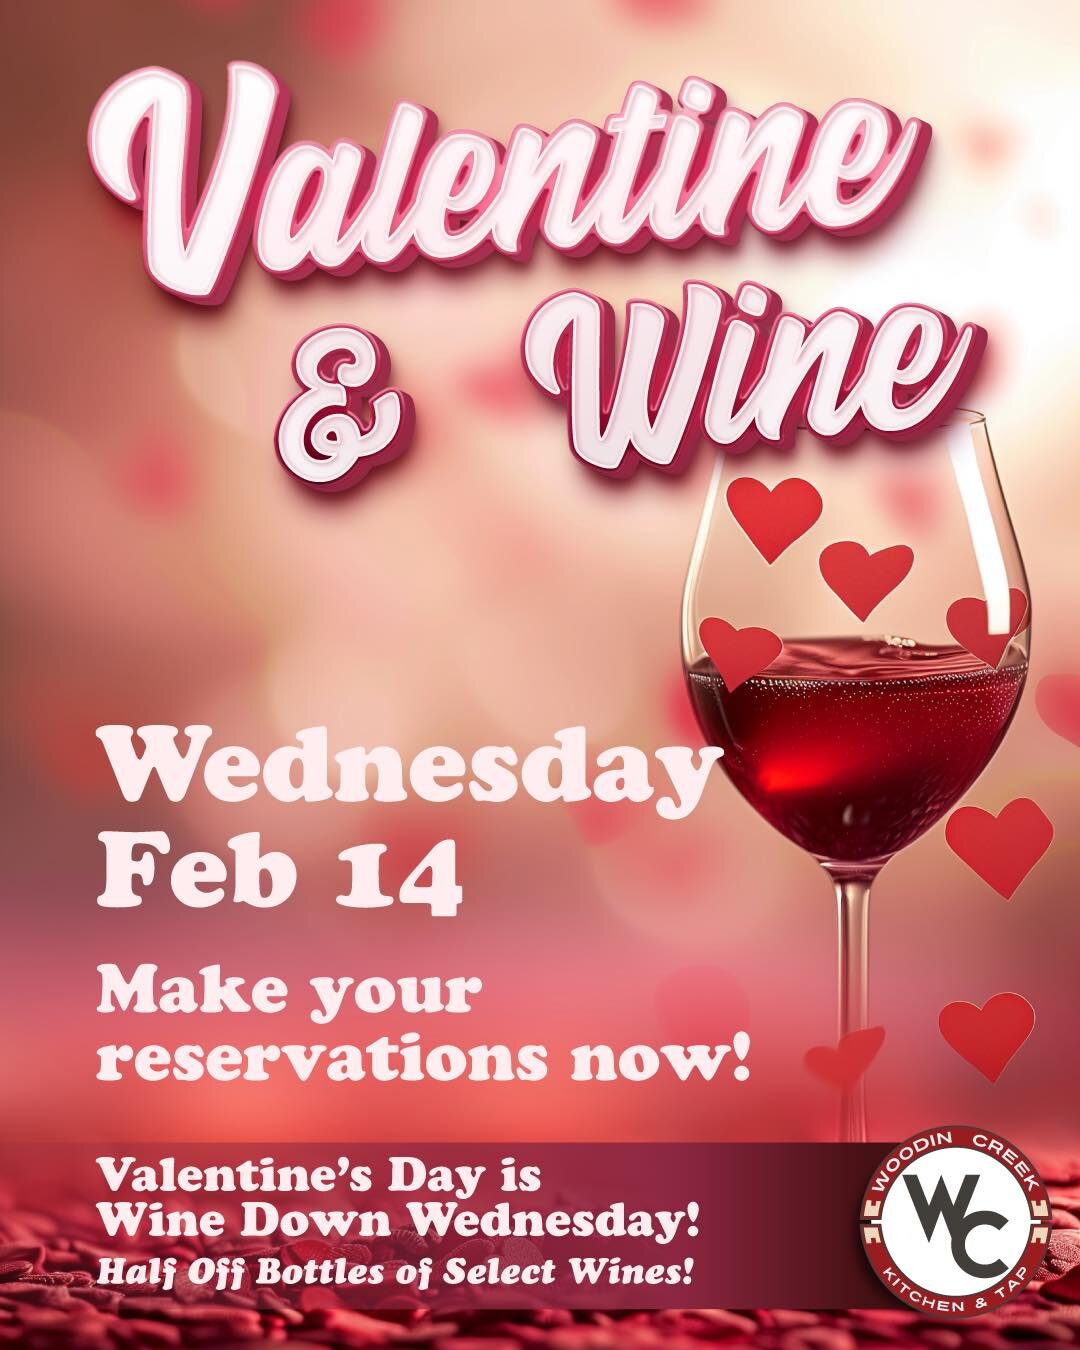 Valentines Day is right around the corner. This year it also happens to fall on our Wine Down Wednesday&rsquo;s. What a perfect match. Call now to reserve your spot. 425-215-1999 #wckt #agatheringplace #woodincreekvillage